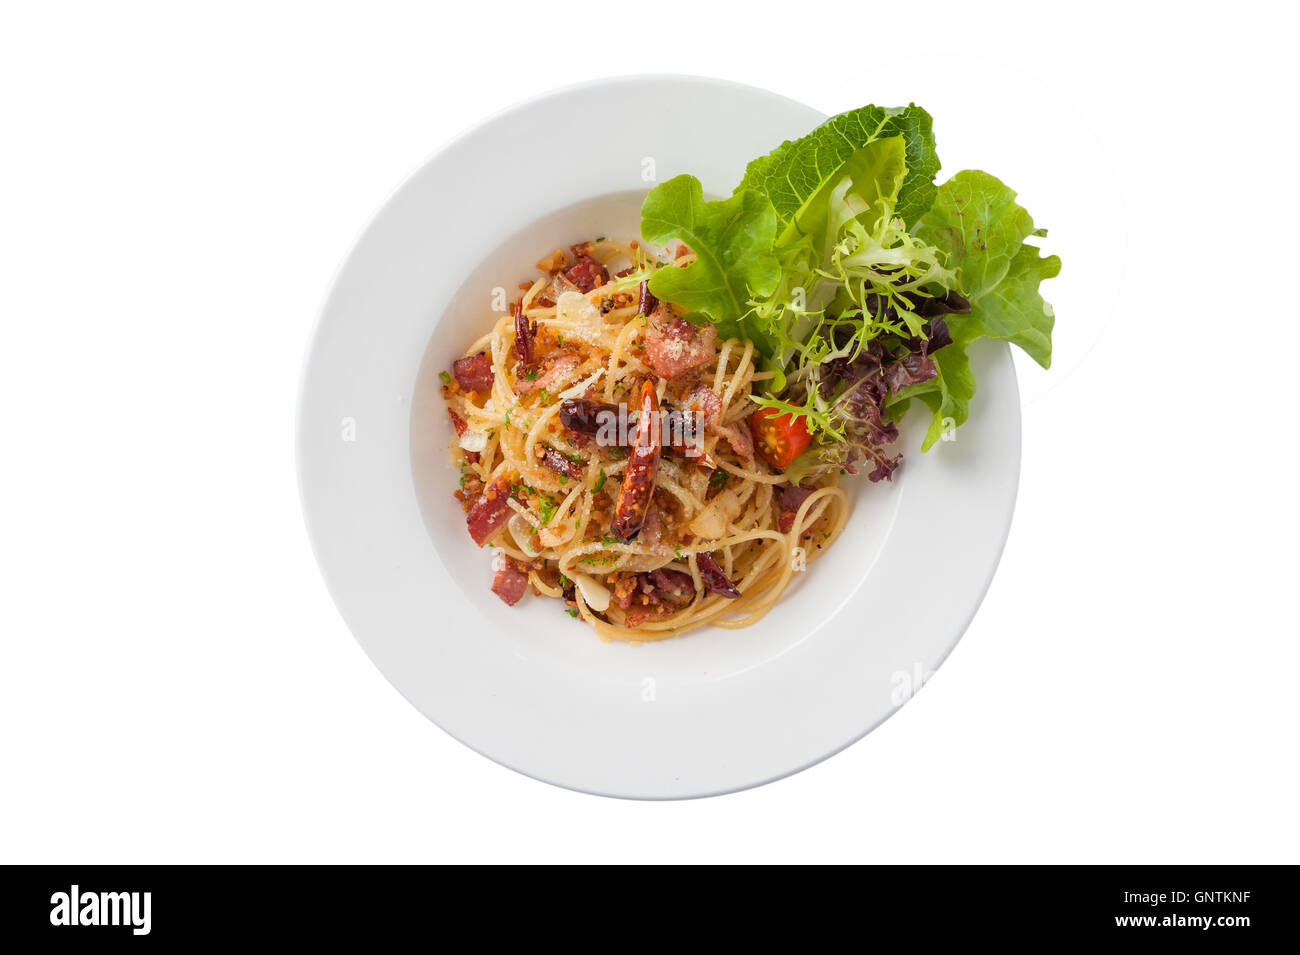 Top view of Thai, Japanese, and European fusion food style spicy pasta with bacon and dried chili in ceramic dish isolated on wh Stock Photo